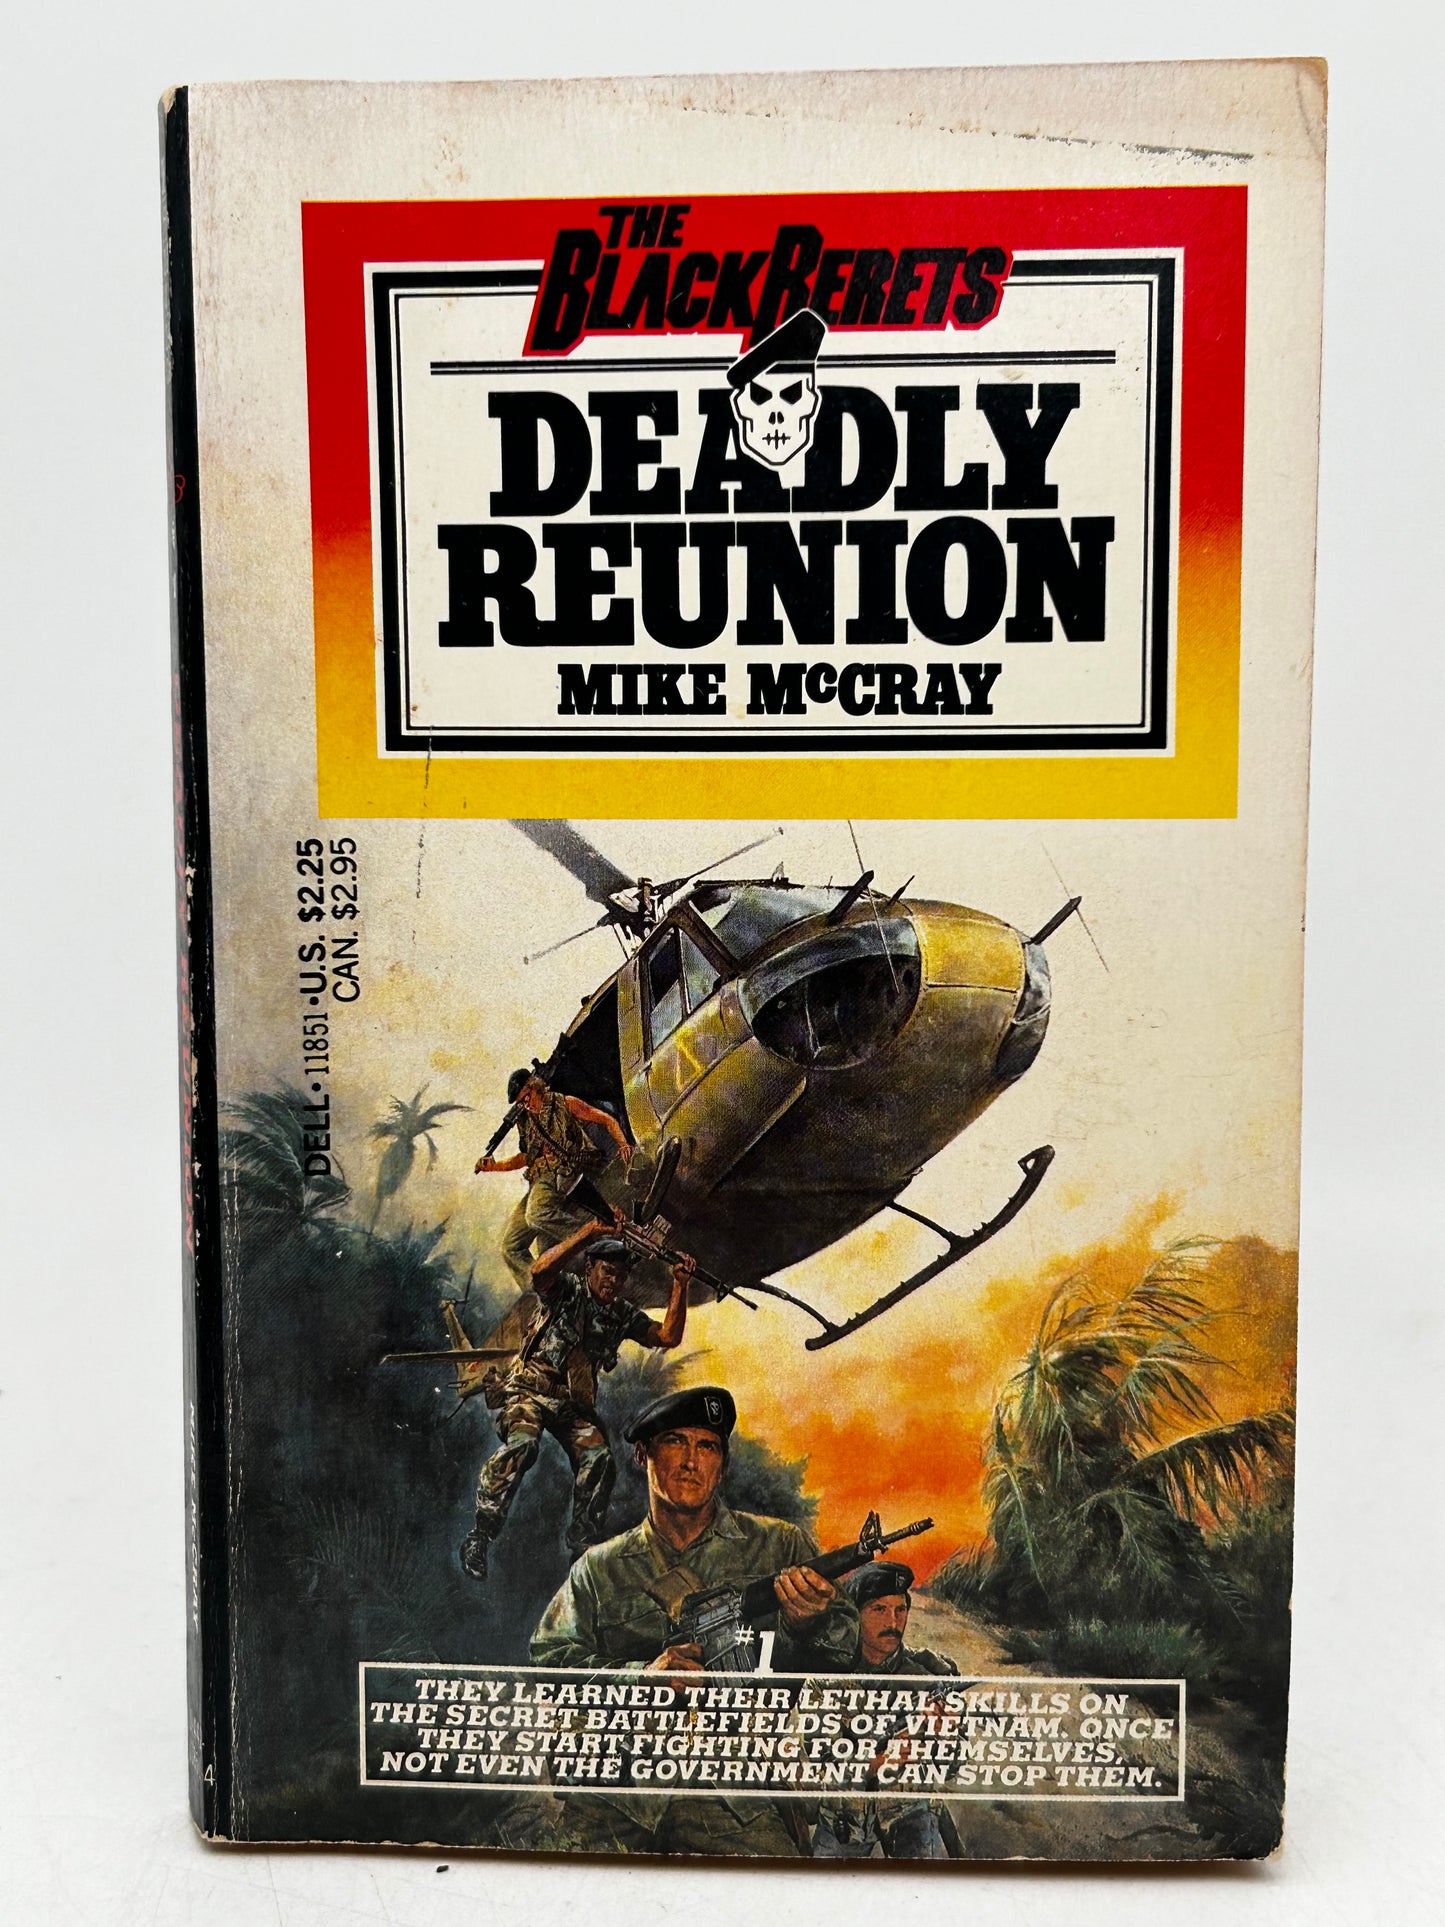 Black Berets #1 Deadly Reunion DELL Paperback Mike McCray SF11